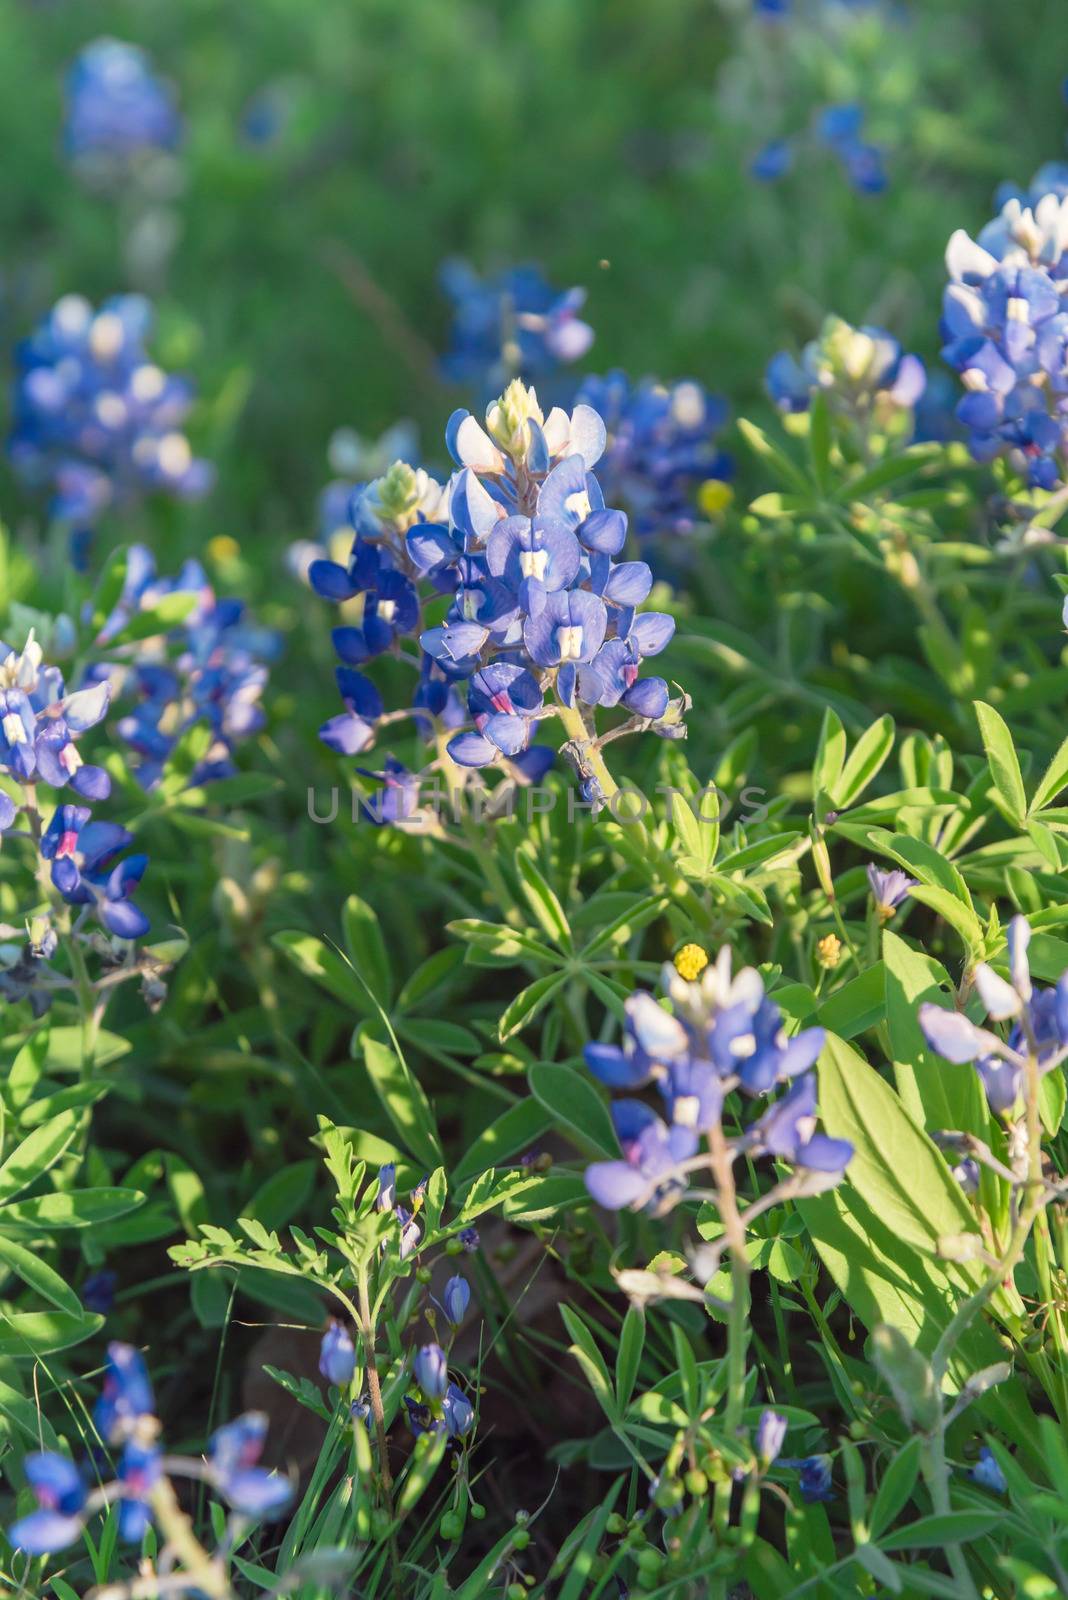 Close-up view a bush of Bluebonnet full blossom at springtime near Dallas, Texas, USA. This is the official state flower of Texas. Wildflower blooming at sunset background